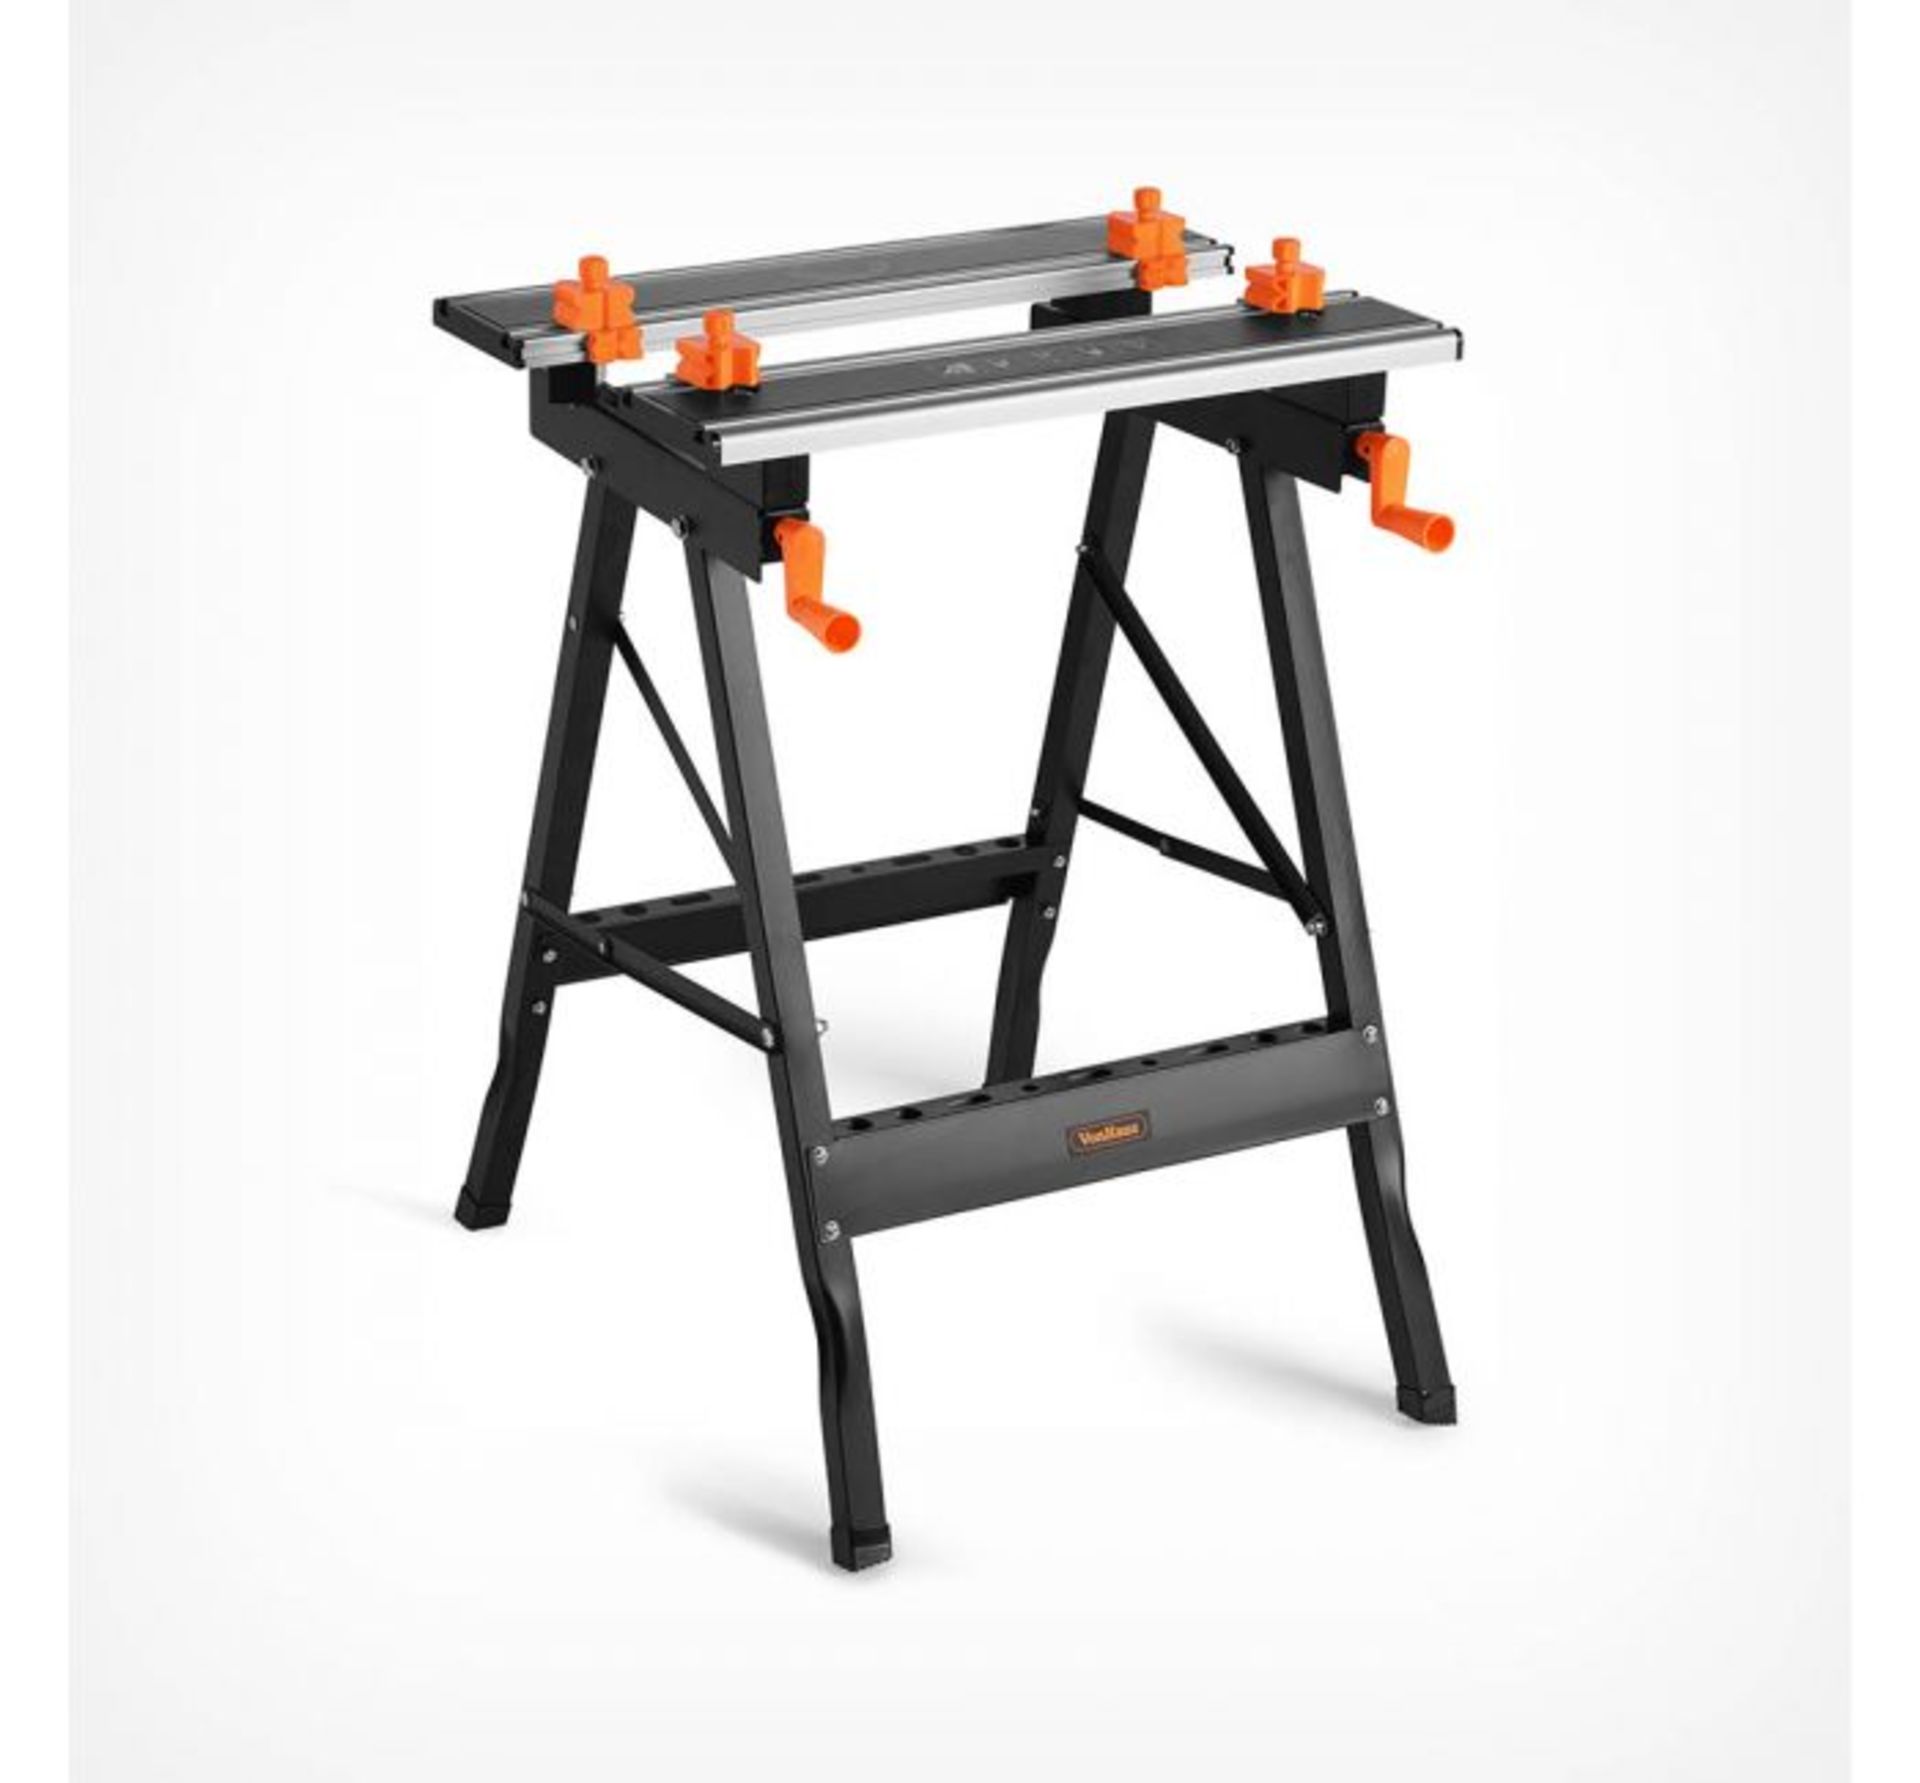 (MY58) Aluminium Top Workbench Aluminium worksurface with plastic stoppers for securing workpi...